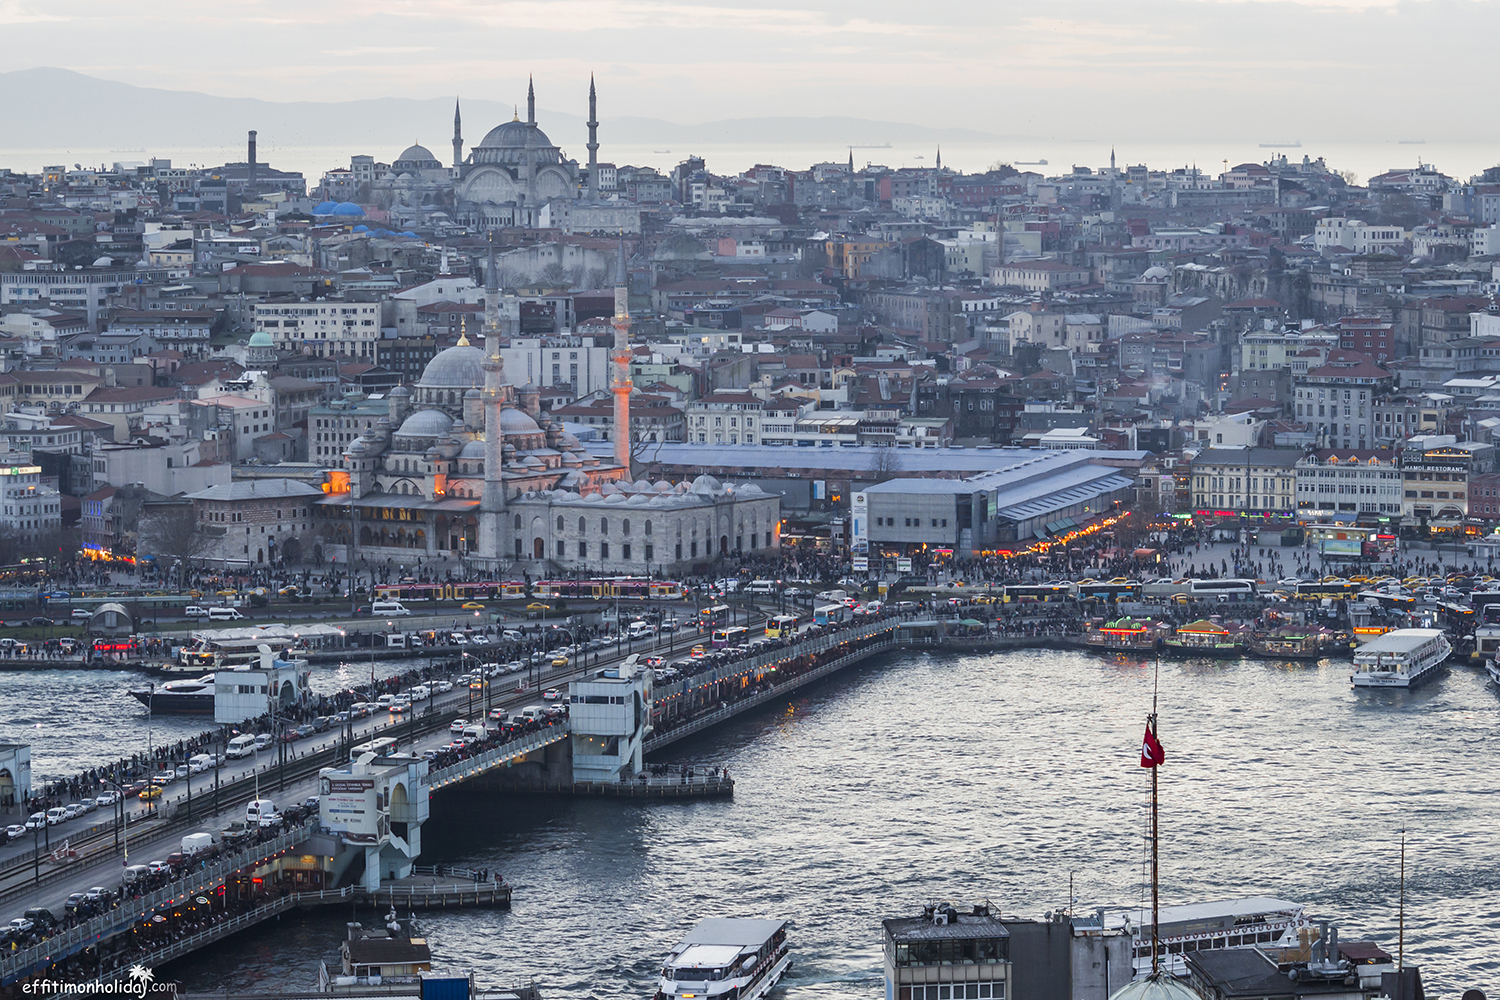 Instanbul is waiting for you to discover its secrets, stories and delicious food